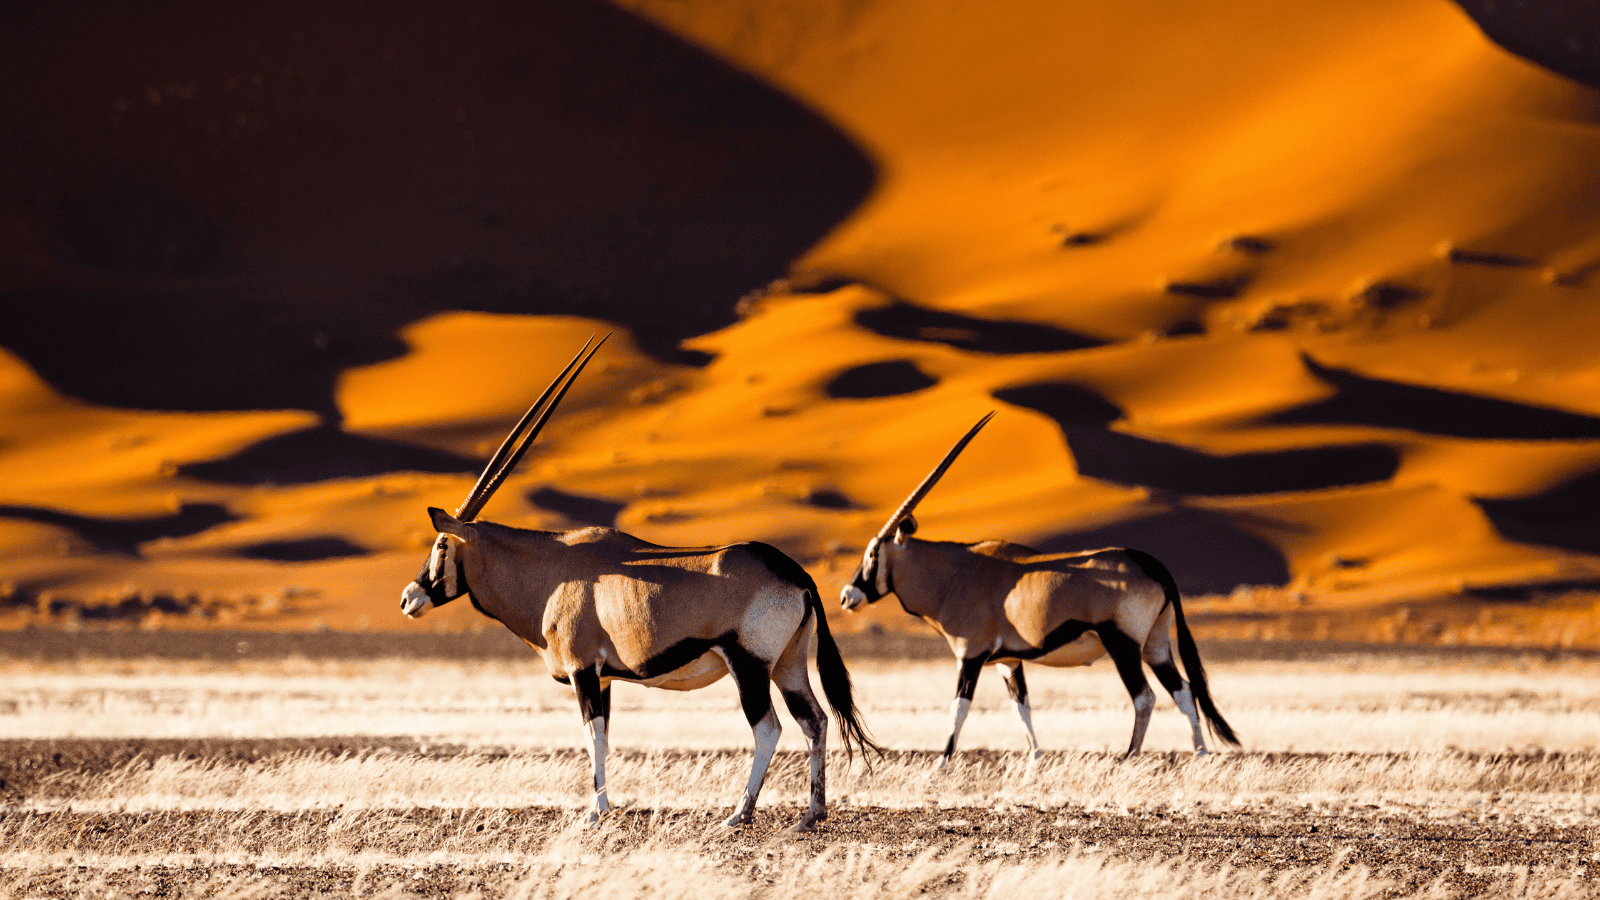 <p>Uncover Namibia’s rich cultural heritage and natural wonders on the 10-Day Best of Namibia Safari. The thrilling <a href="https://wild-wings-safaris.com/tours-and-safaris/10-day-best-of-namibia-safari" rel="nofollow external noopener noreferrer">Wild Wings Safaris</a> excursion will allow you to see towering dunes, quaint coastlines, and pristine scenery. Spot animals like seals, elephants, and lions while traveling throughout the Skeleton Coast and Etosha National Park.</p>